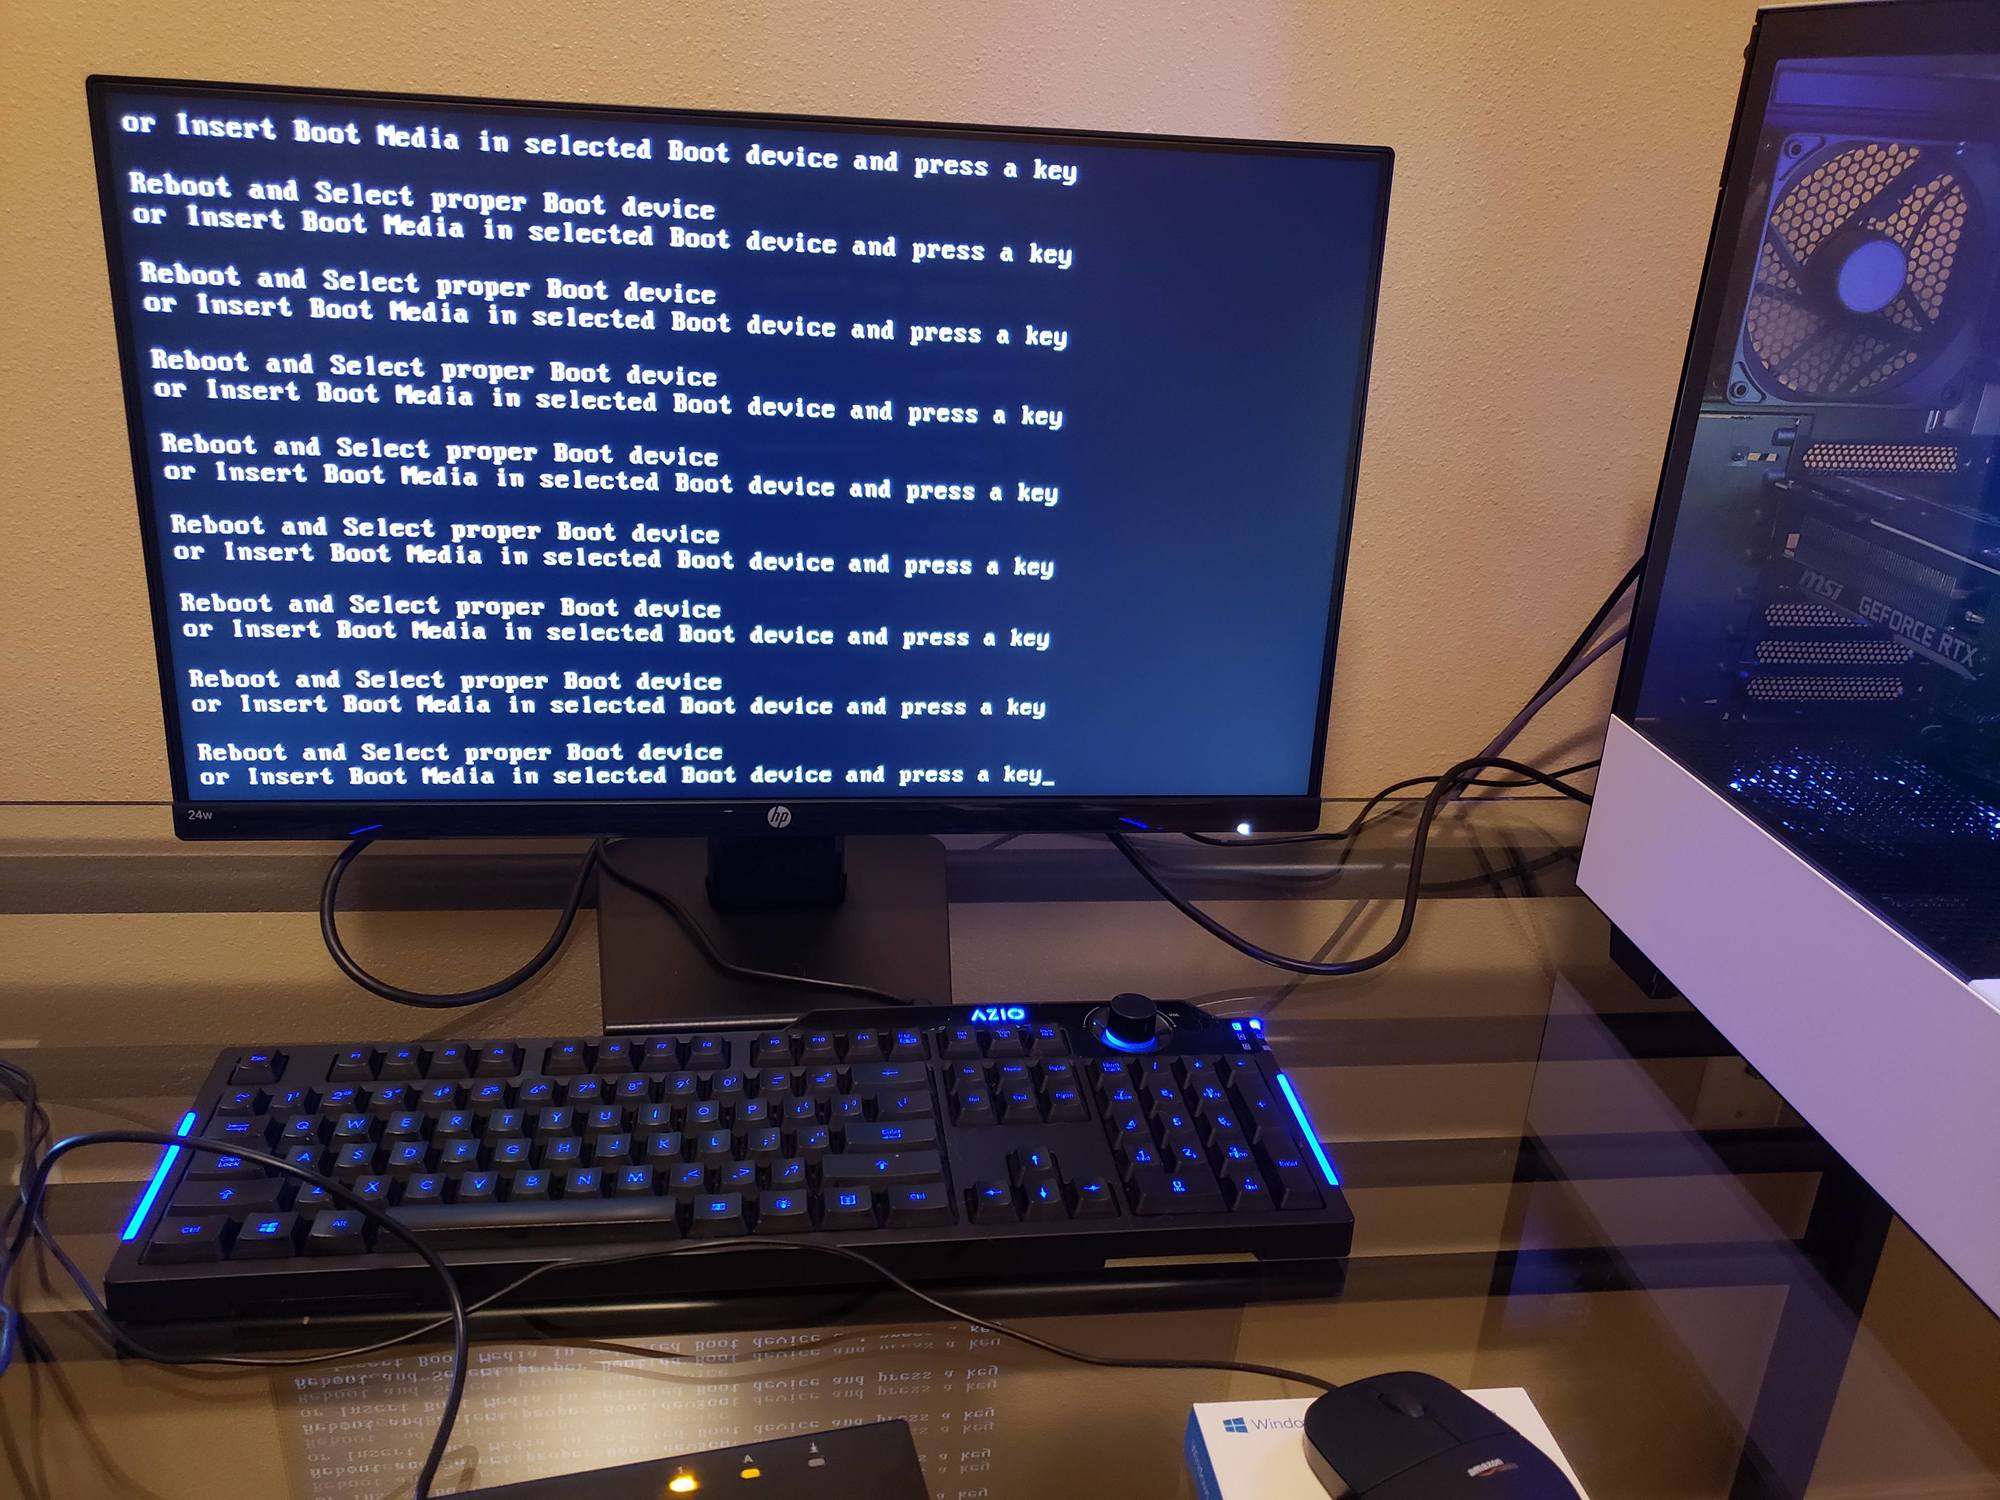 Reboot and Select proper Boot device... - CPUs, Motherboards, and